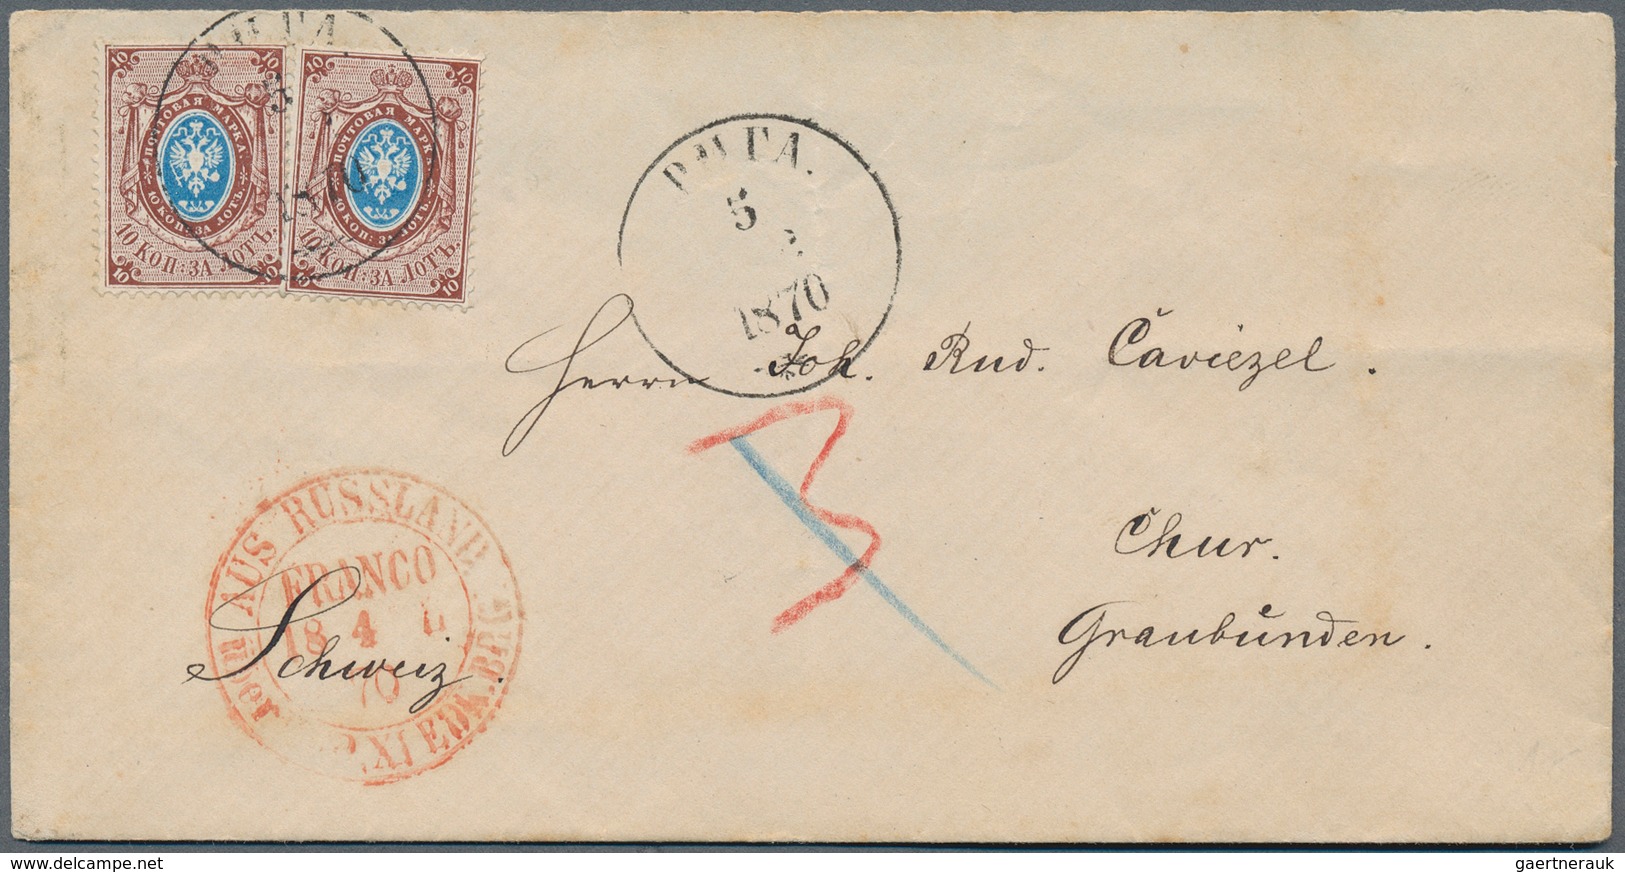 Russland: 1868/75 seven letters all from Riga to foreign countries, all before UPU, with various sta